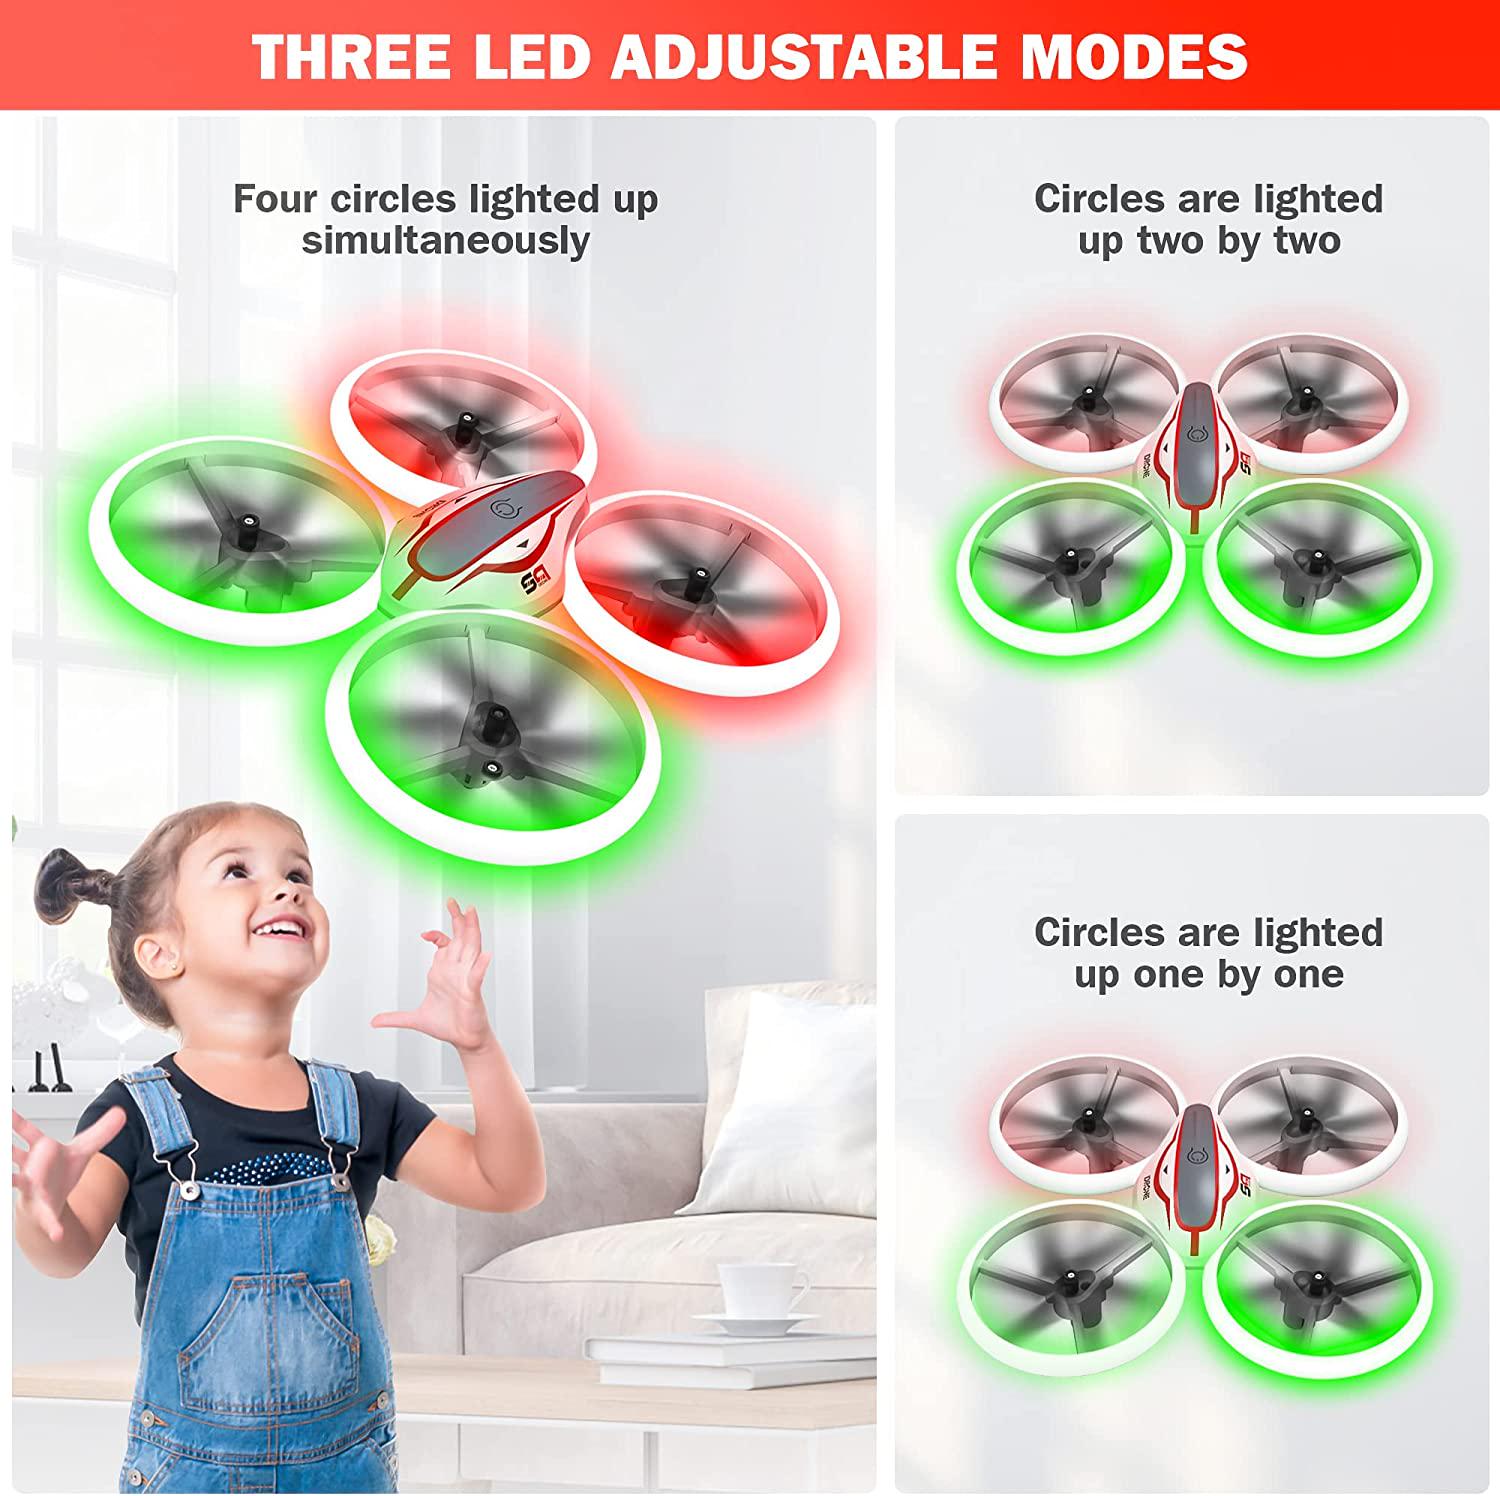 LEAPRCSTORE, Leaprcstore S9 Remote Control LED Drone for Kids,Small RC Quadcopter,Cool Toys Gifts for Boys Girls, Mini Drone with Red&Green Lights,Altitude Hold,3D Flips,One Key Start, Headless Mode, 2 Batteries